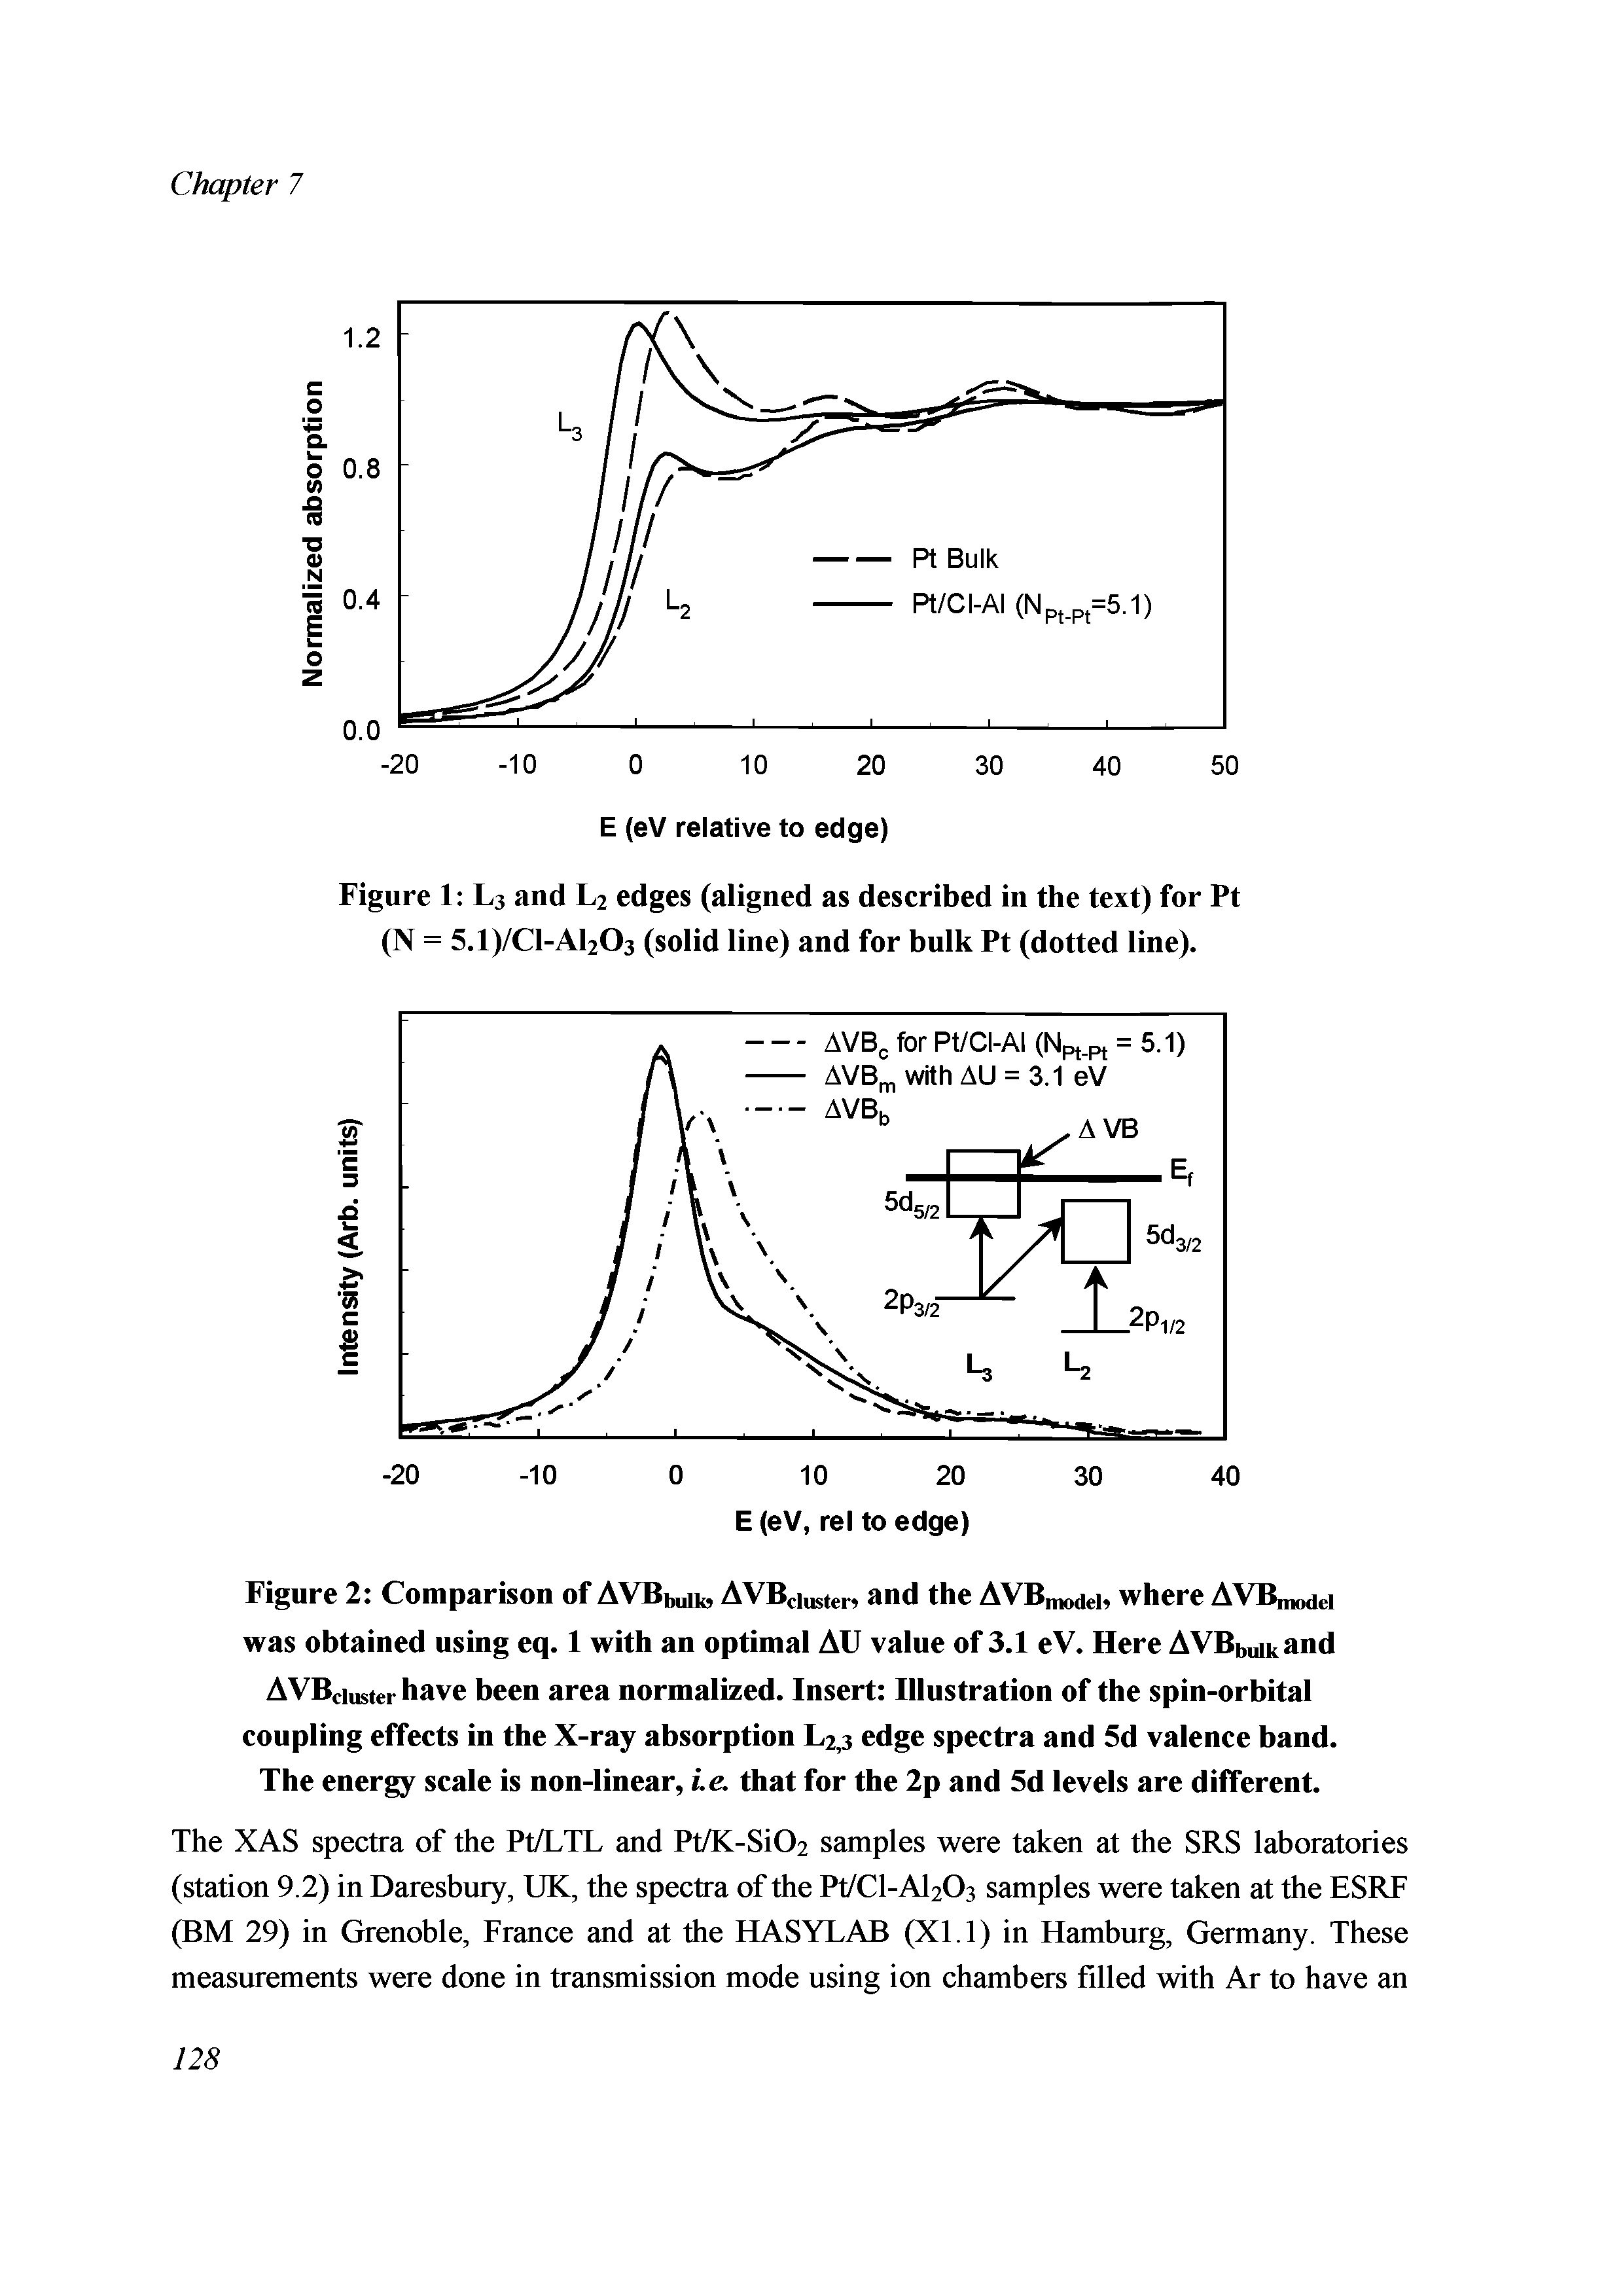 Figure 2 Comparison of AVBbuik, AVBC]asttT, and the AVB K1(iei, where AVBI11D(iei was obtained using eq. 1 with an optimal AU value of 3.1 eV. Here AVB U1 kand AVBduster have been area normalized. Insert Illustration of the spin-orbital coupling effects in the X-ray absorption L2)3 edge spectra and 5d valence band.